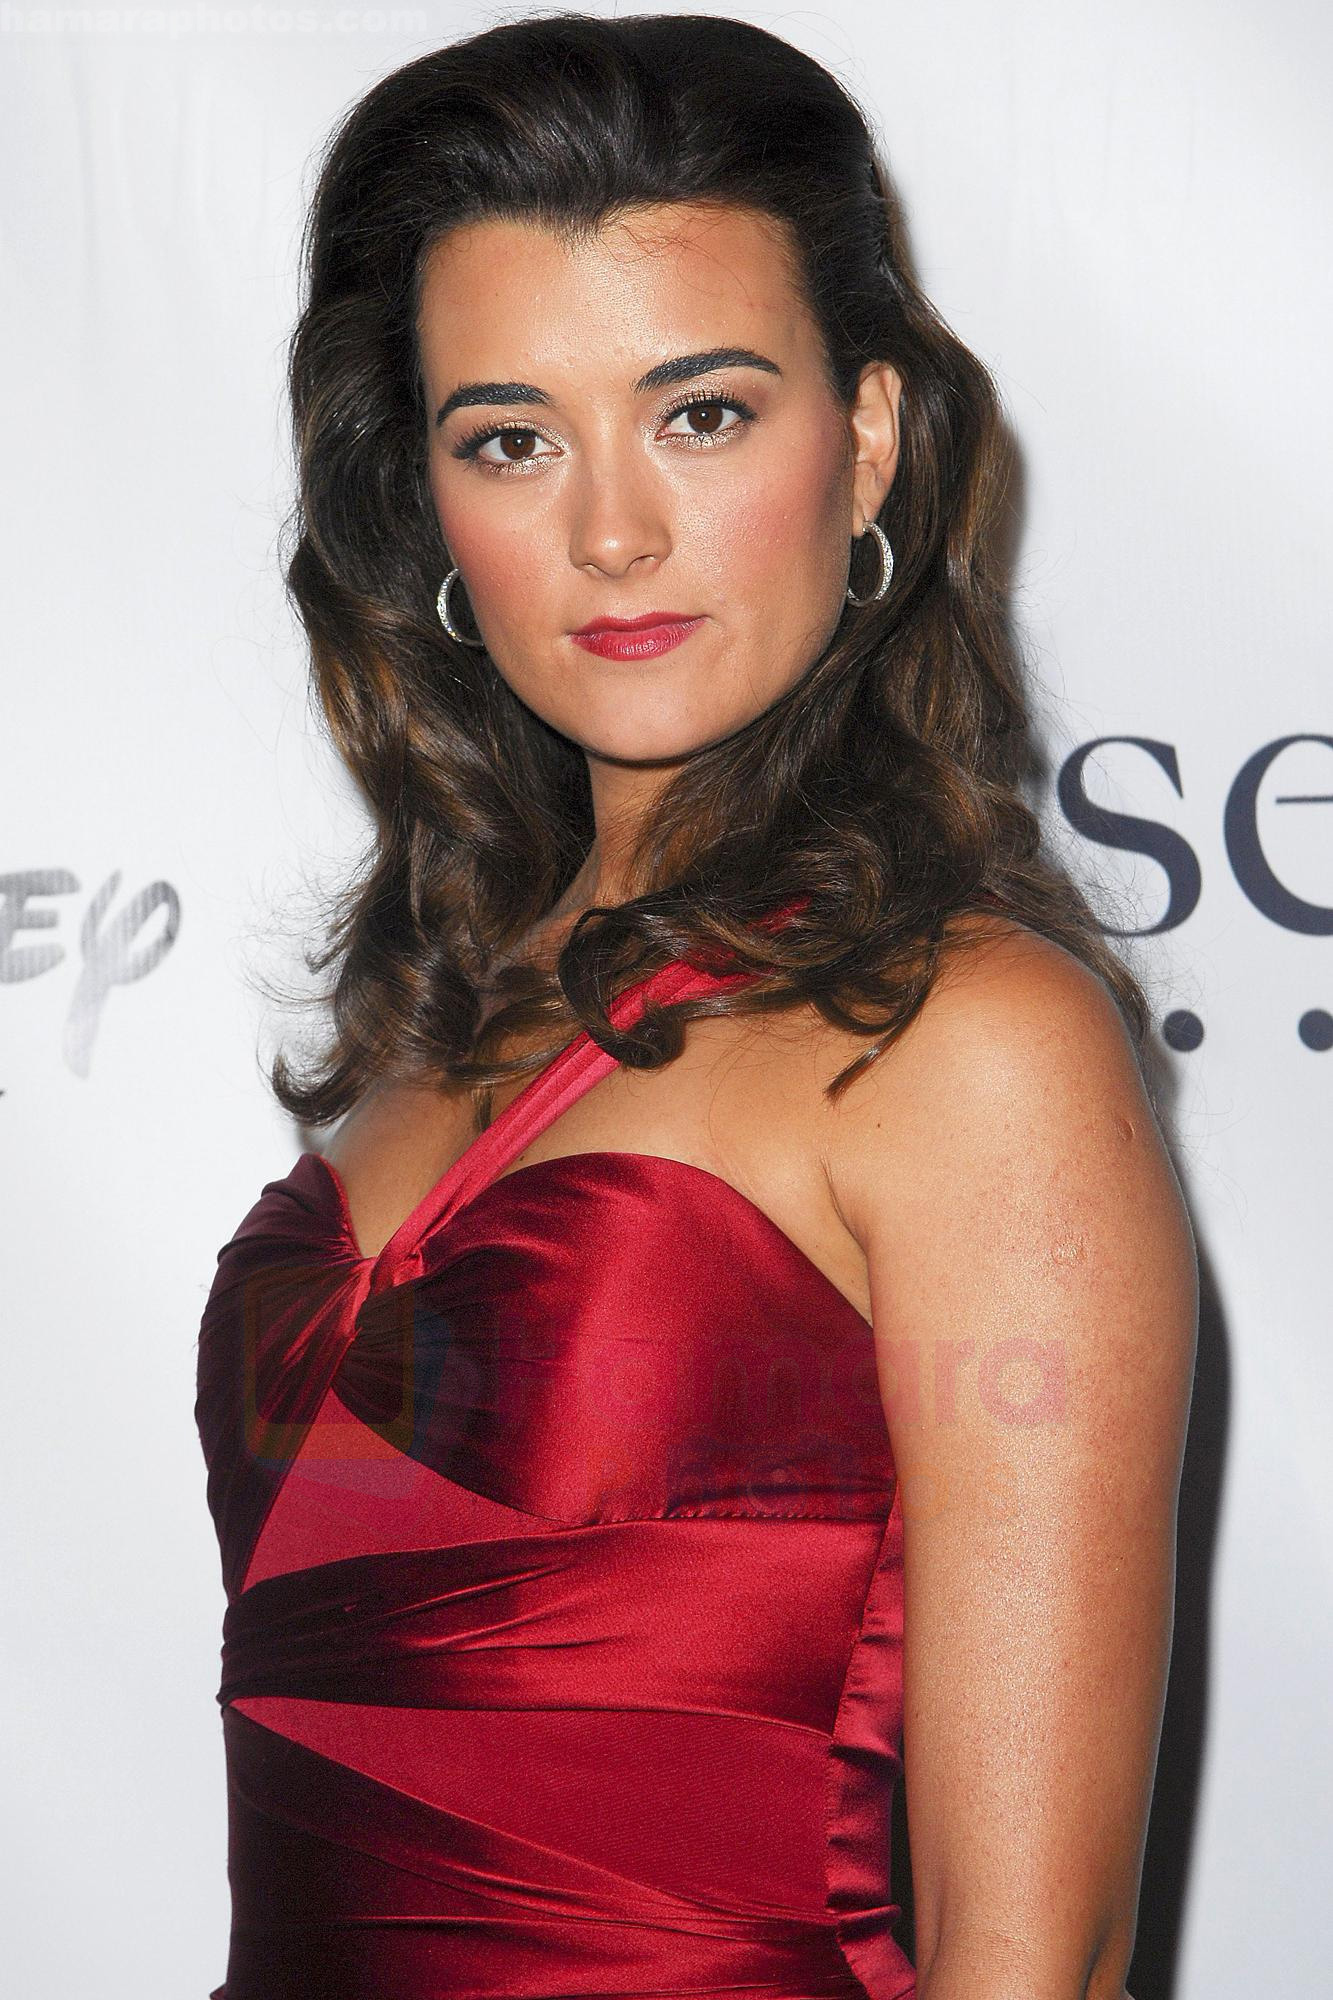 Cote de Pablo at the 24th Annual Imagen Awards held at the Beverly Hilton Hotel Los Angeles, California on 21.08.09 - IANS-WENN 